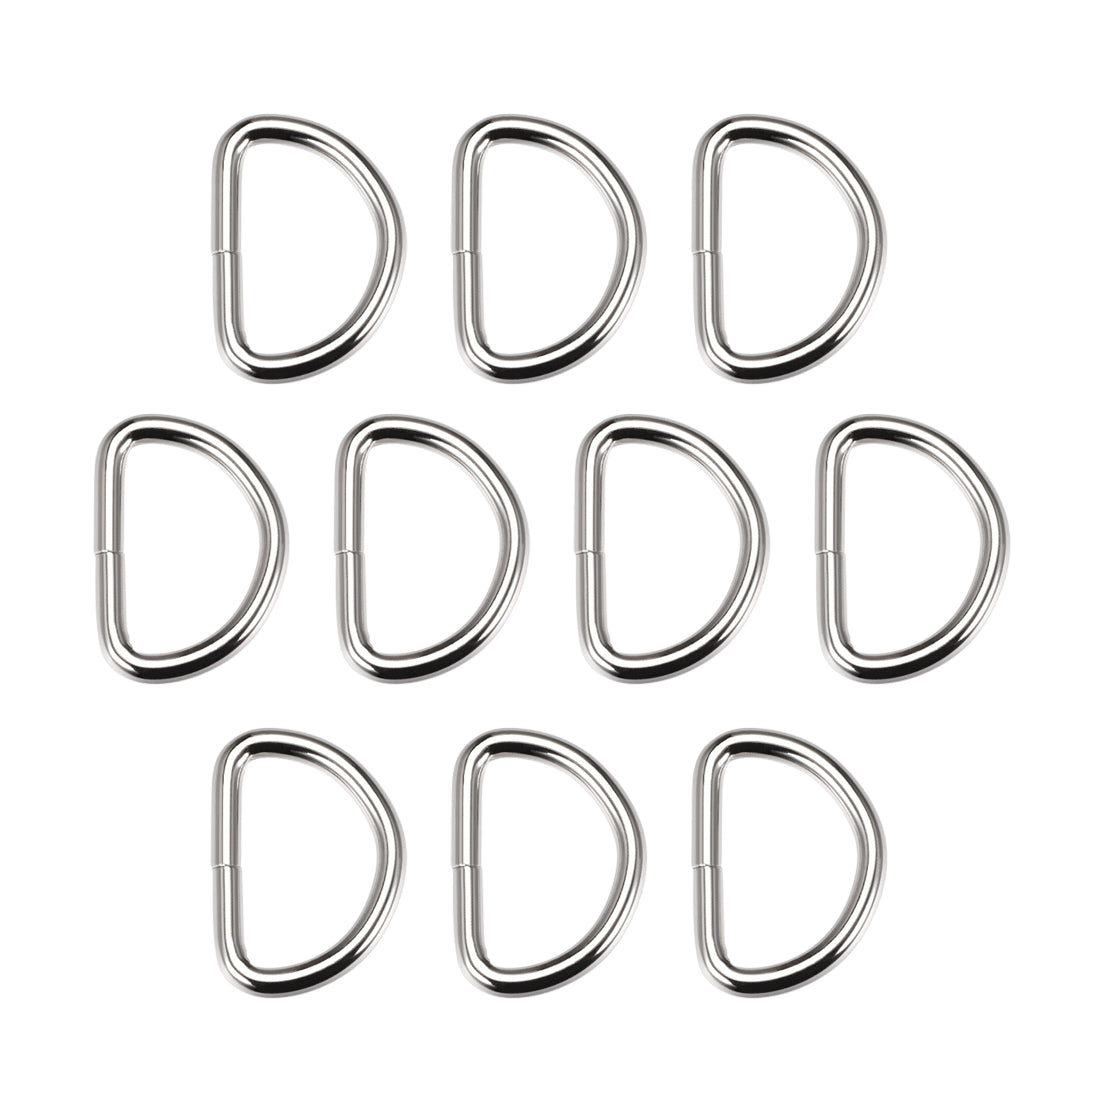 uxcell Uxcell 10 Pcs D Ring Buckle 1.26 Inch Metal Semi-Circular D-Rings Silver Tone for Hardware Bags Belts Craft DIY Accessories